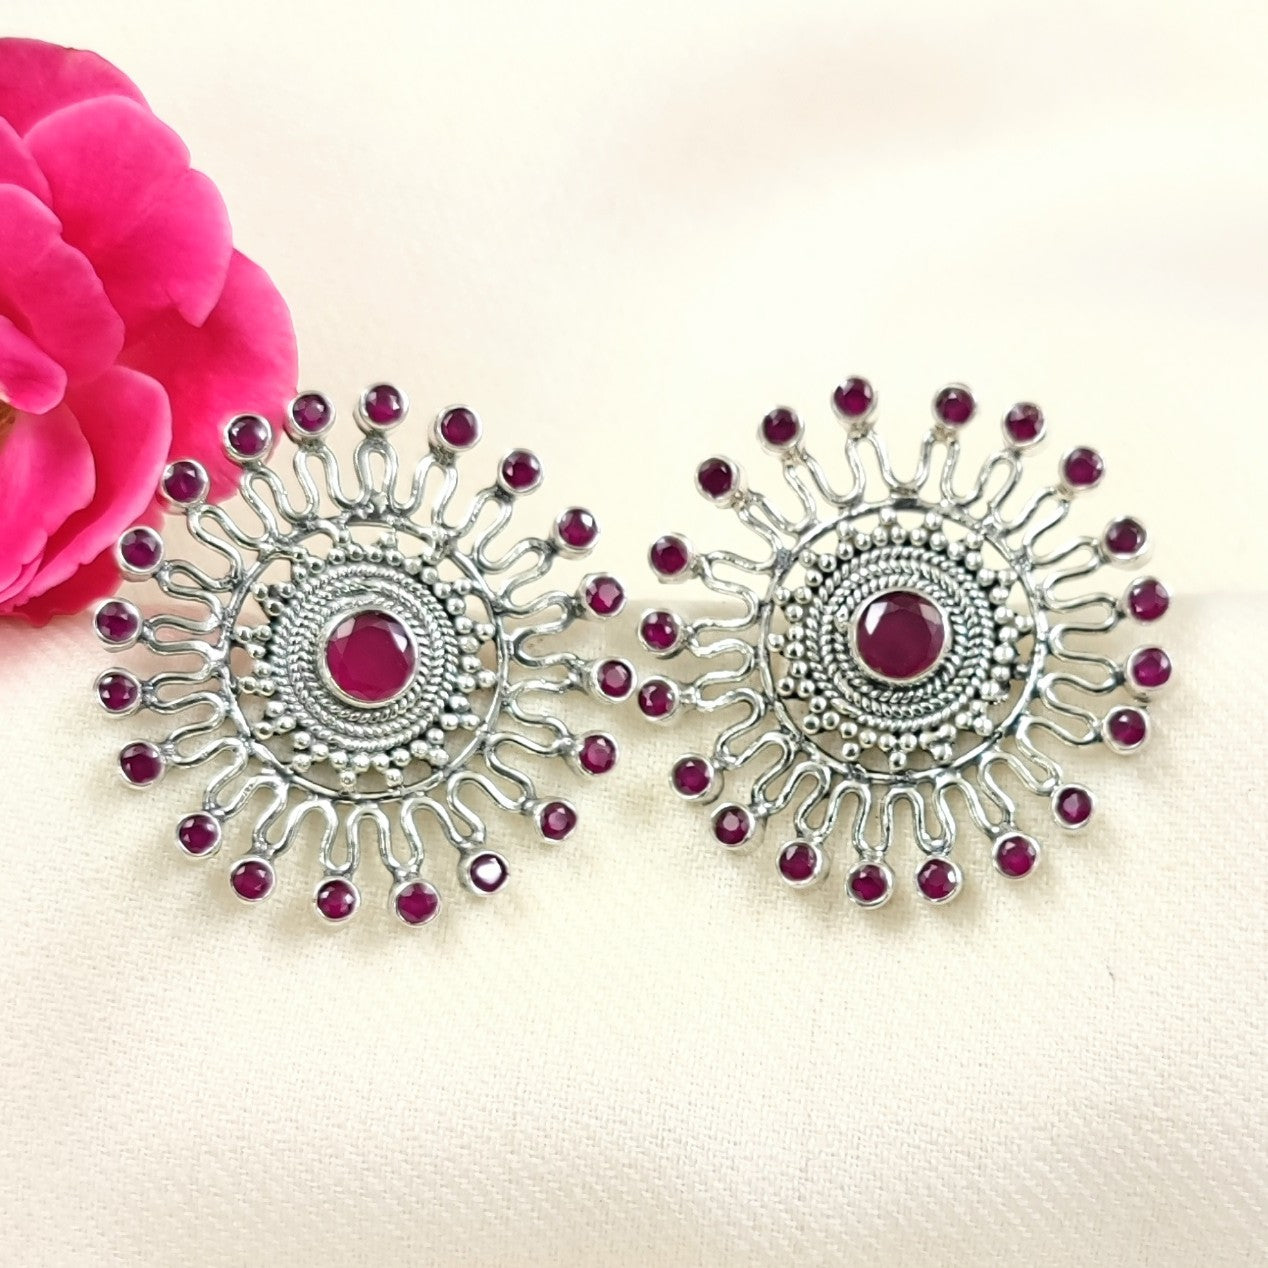 Silver Jewelry Earrings by Jauhri 92.5 Silver - Gul Khil Studs